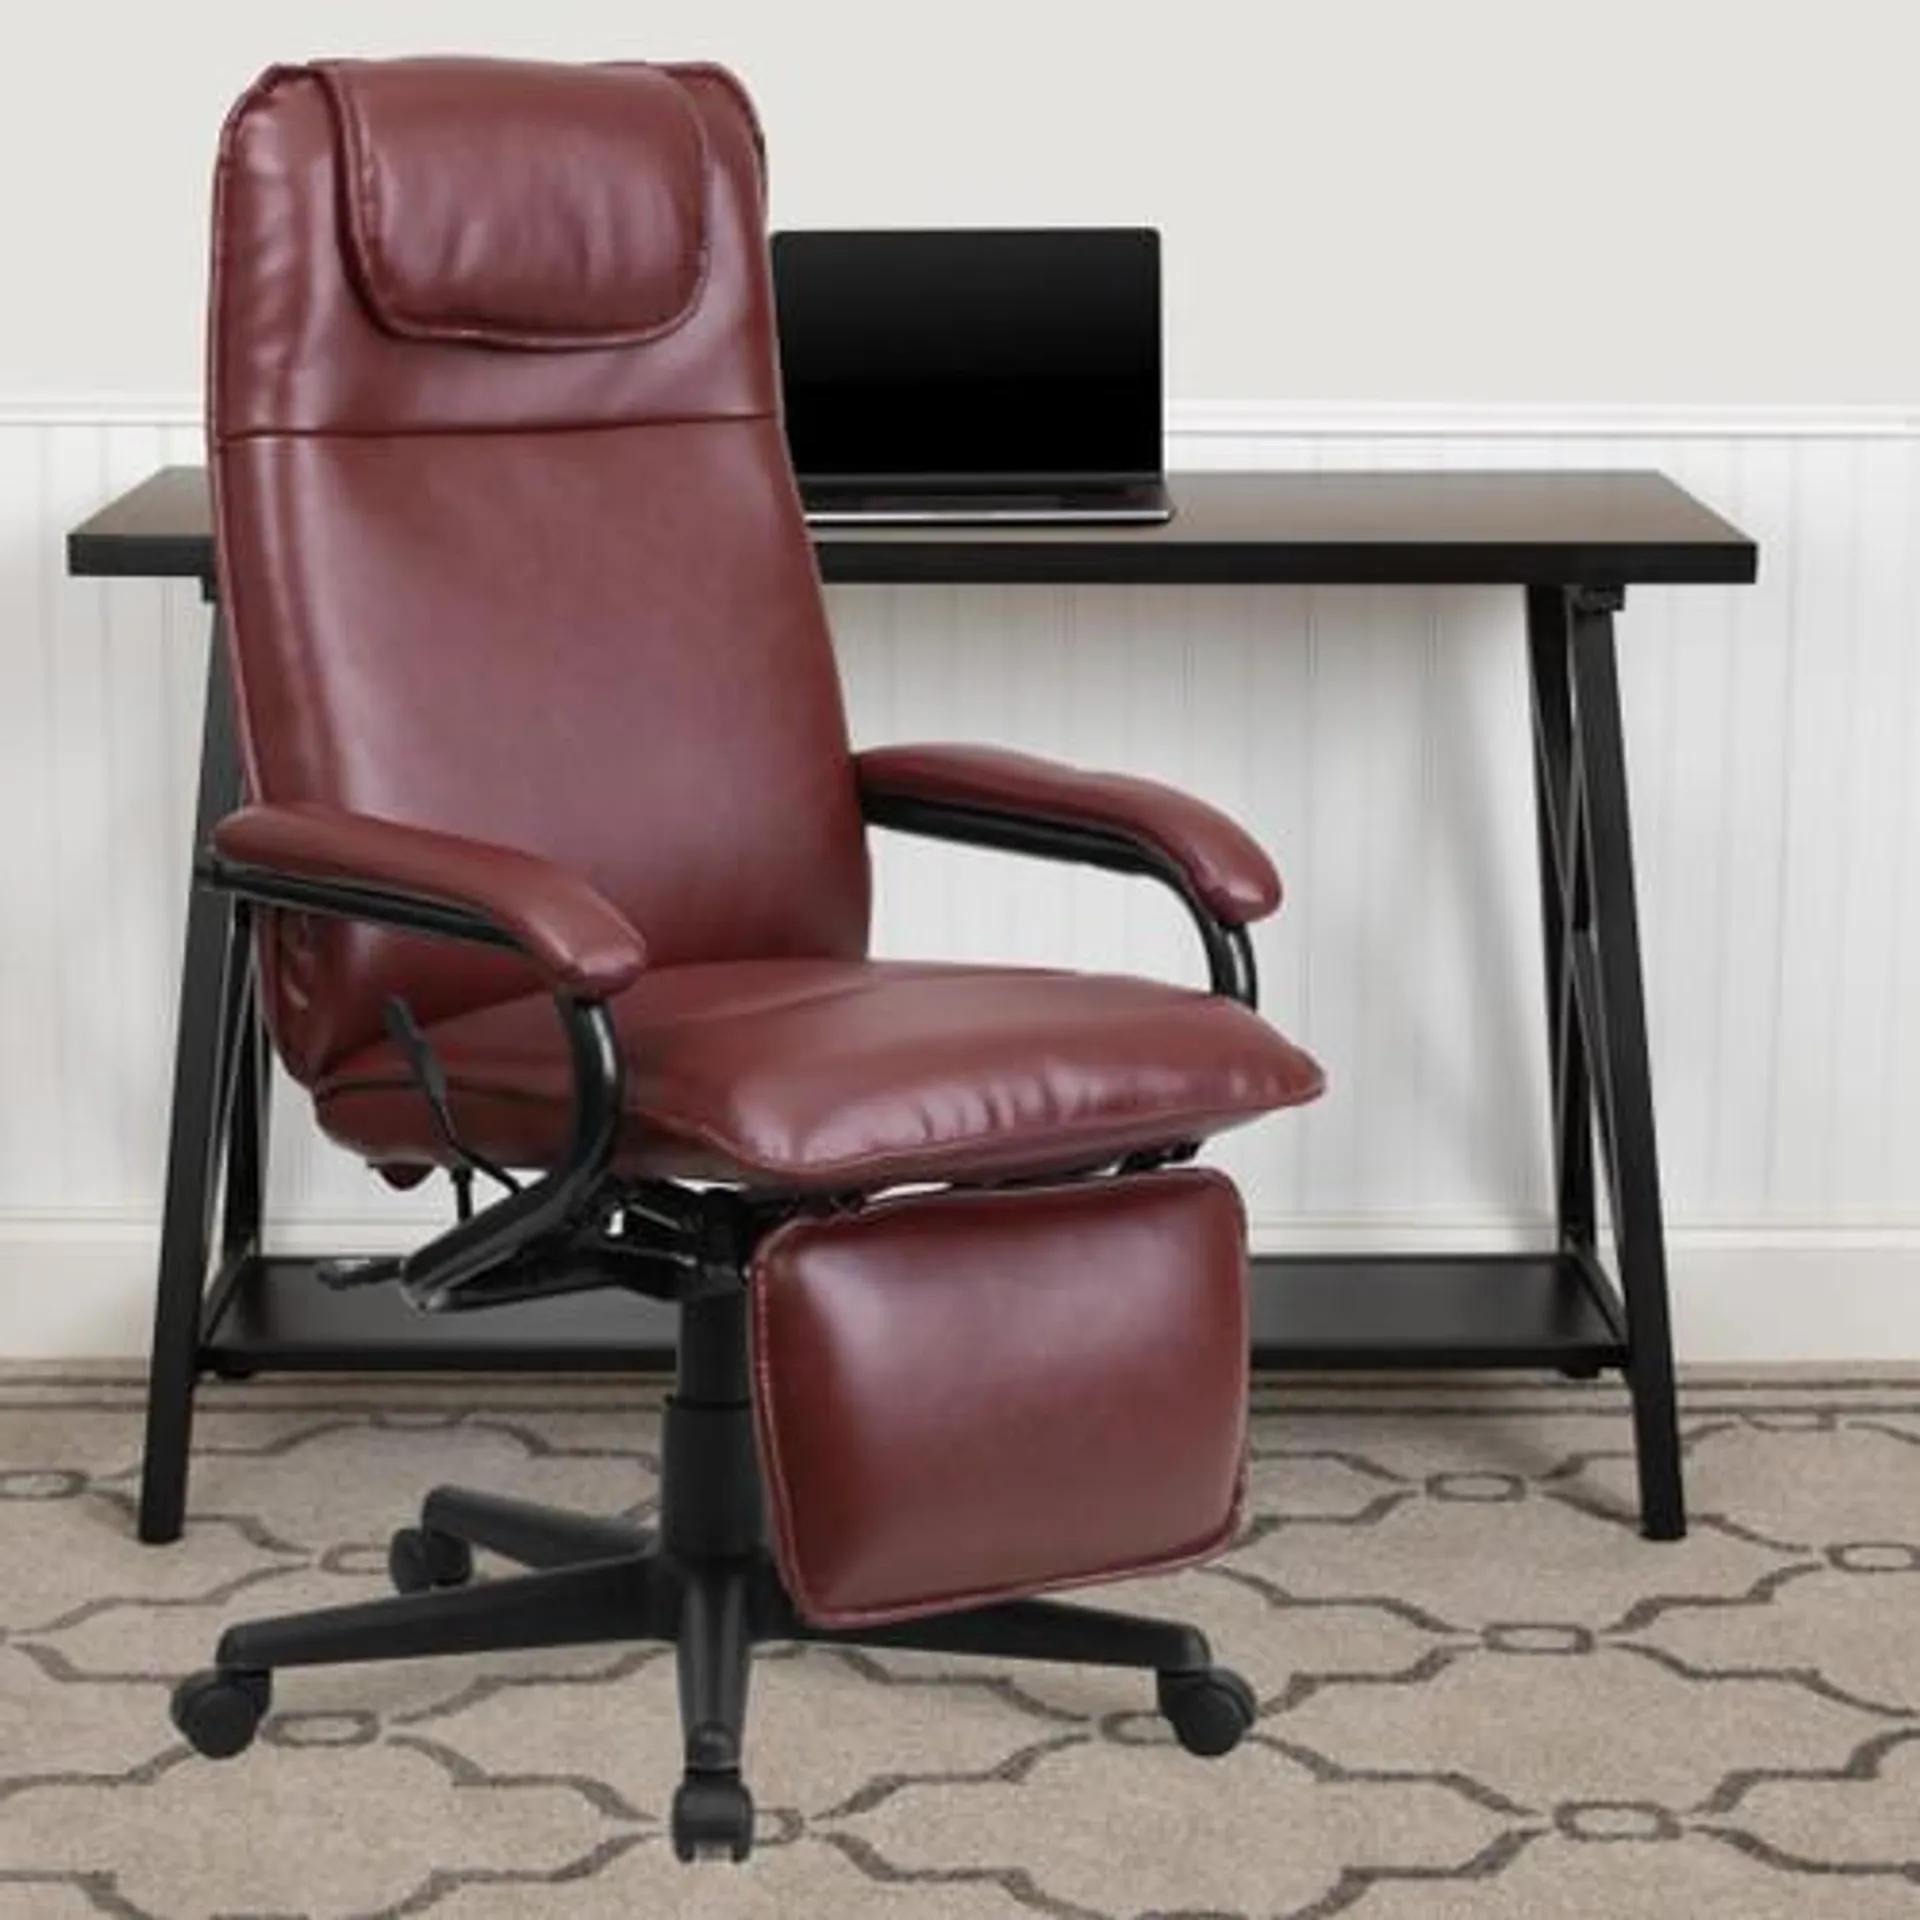 High Back Burgundy LeatherSoft Executive Reclining Ergonomic Swivel Office Chair with Arms - BT70172BGGG